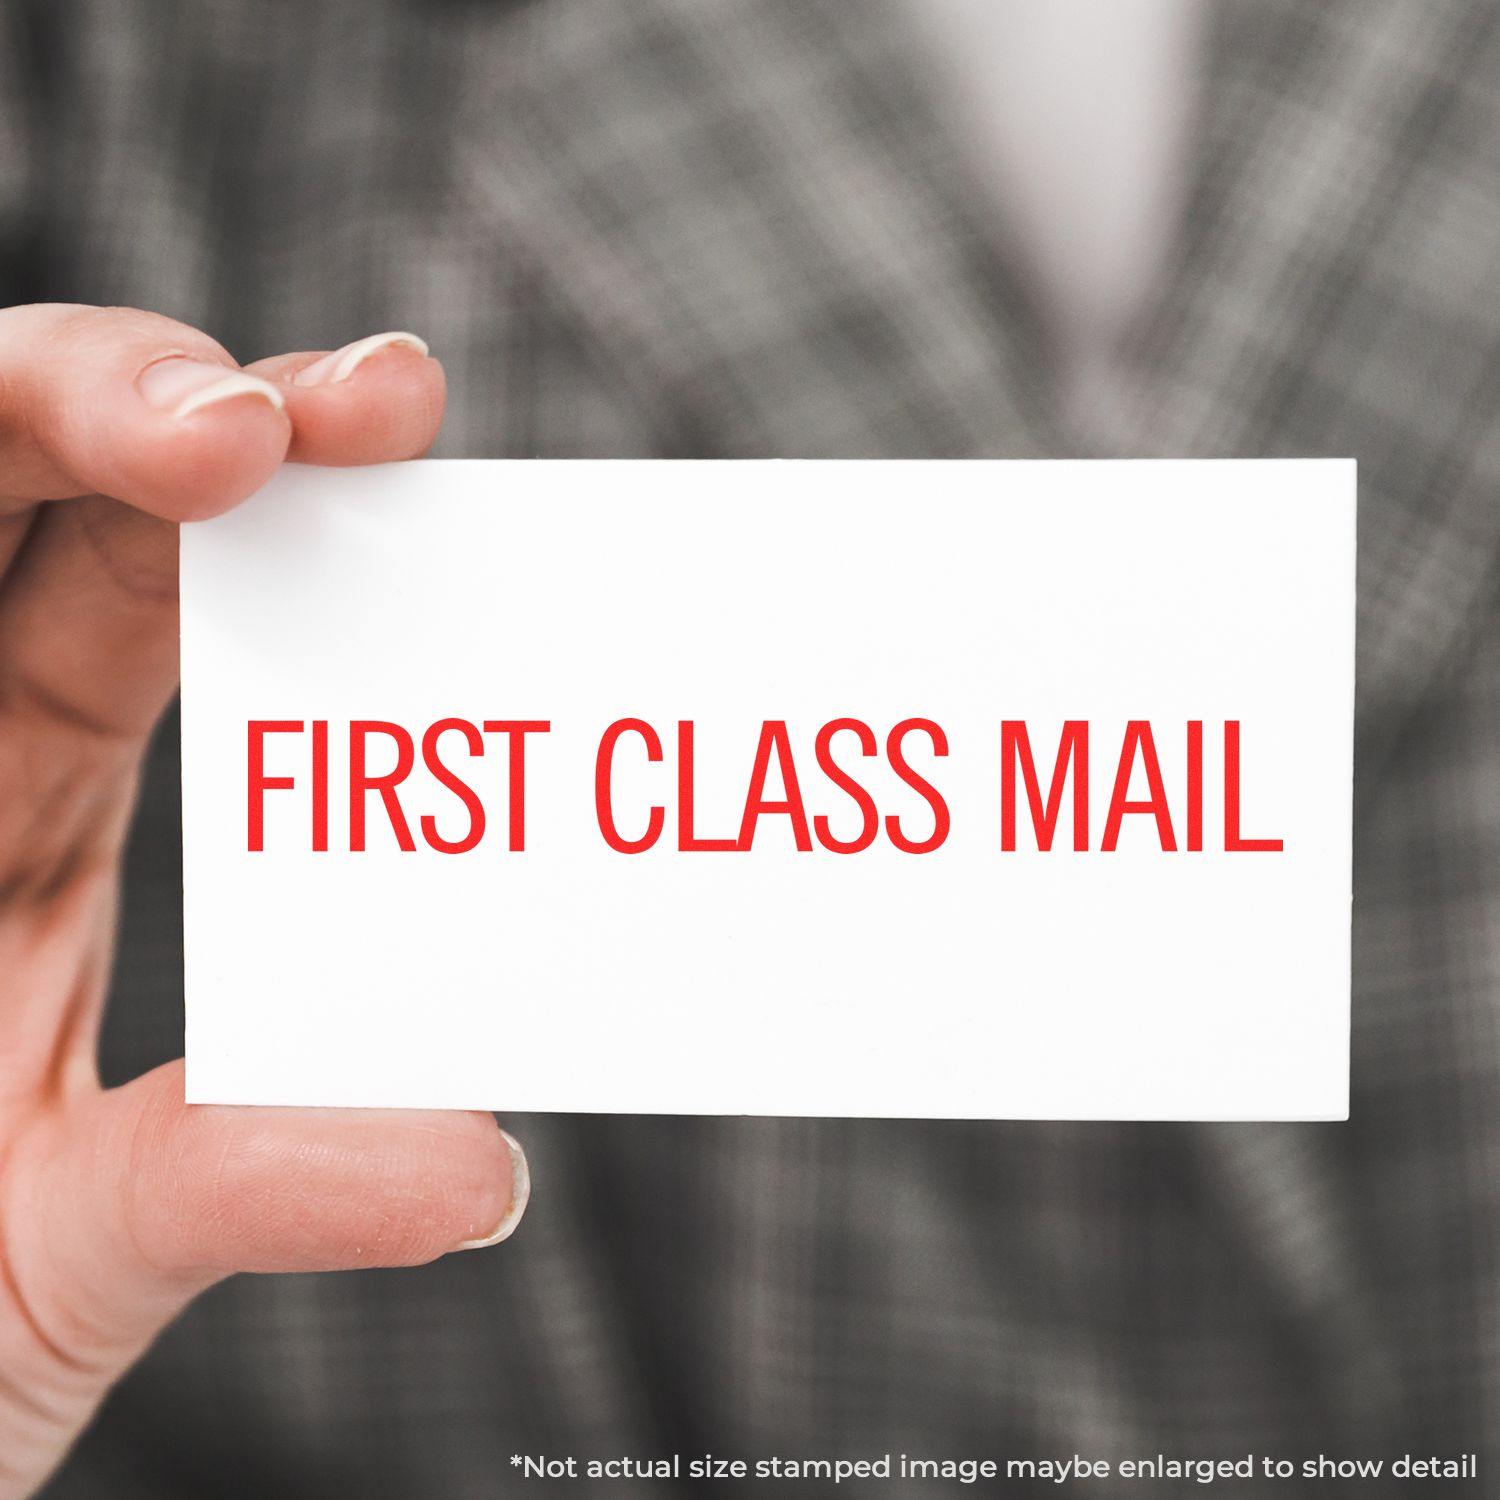 In Use Large Pre-Inked Narrow First Class Mail Stamp Image